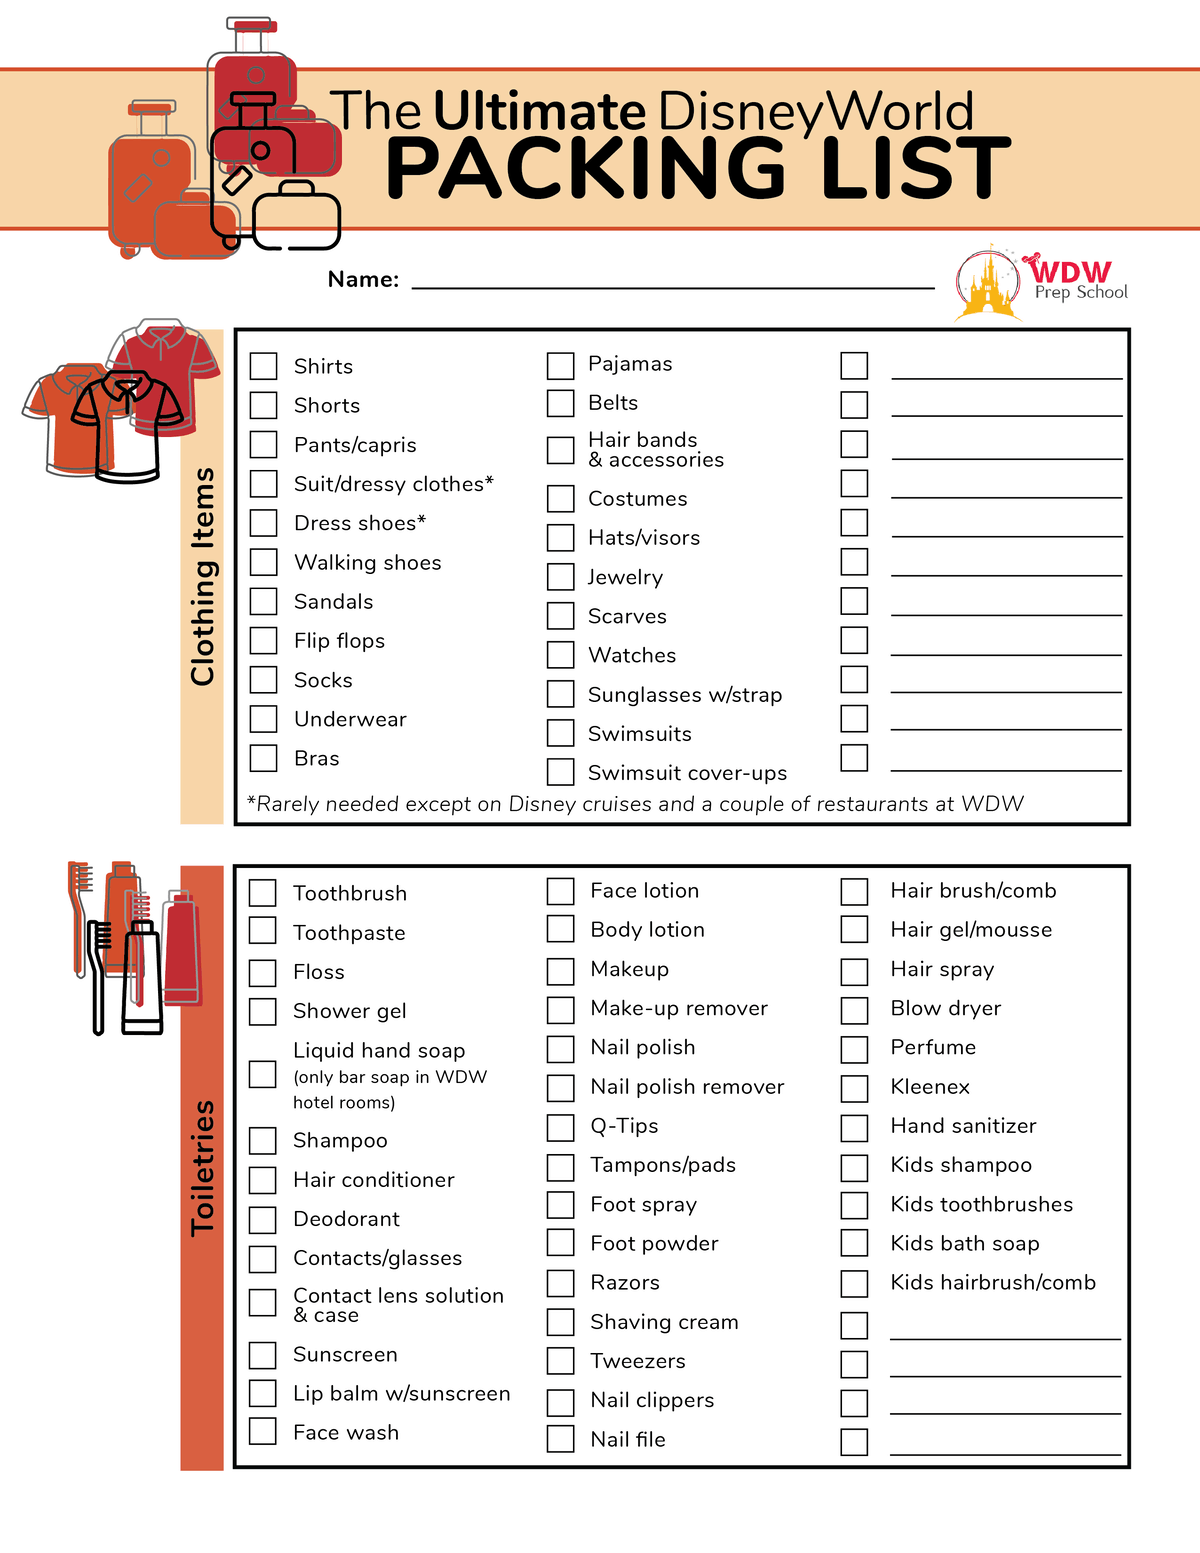 The ultimate Disney packing list Word, PDF and Google Docs formats